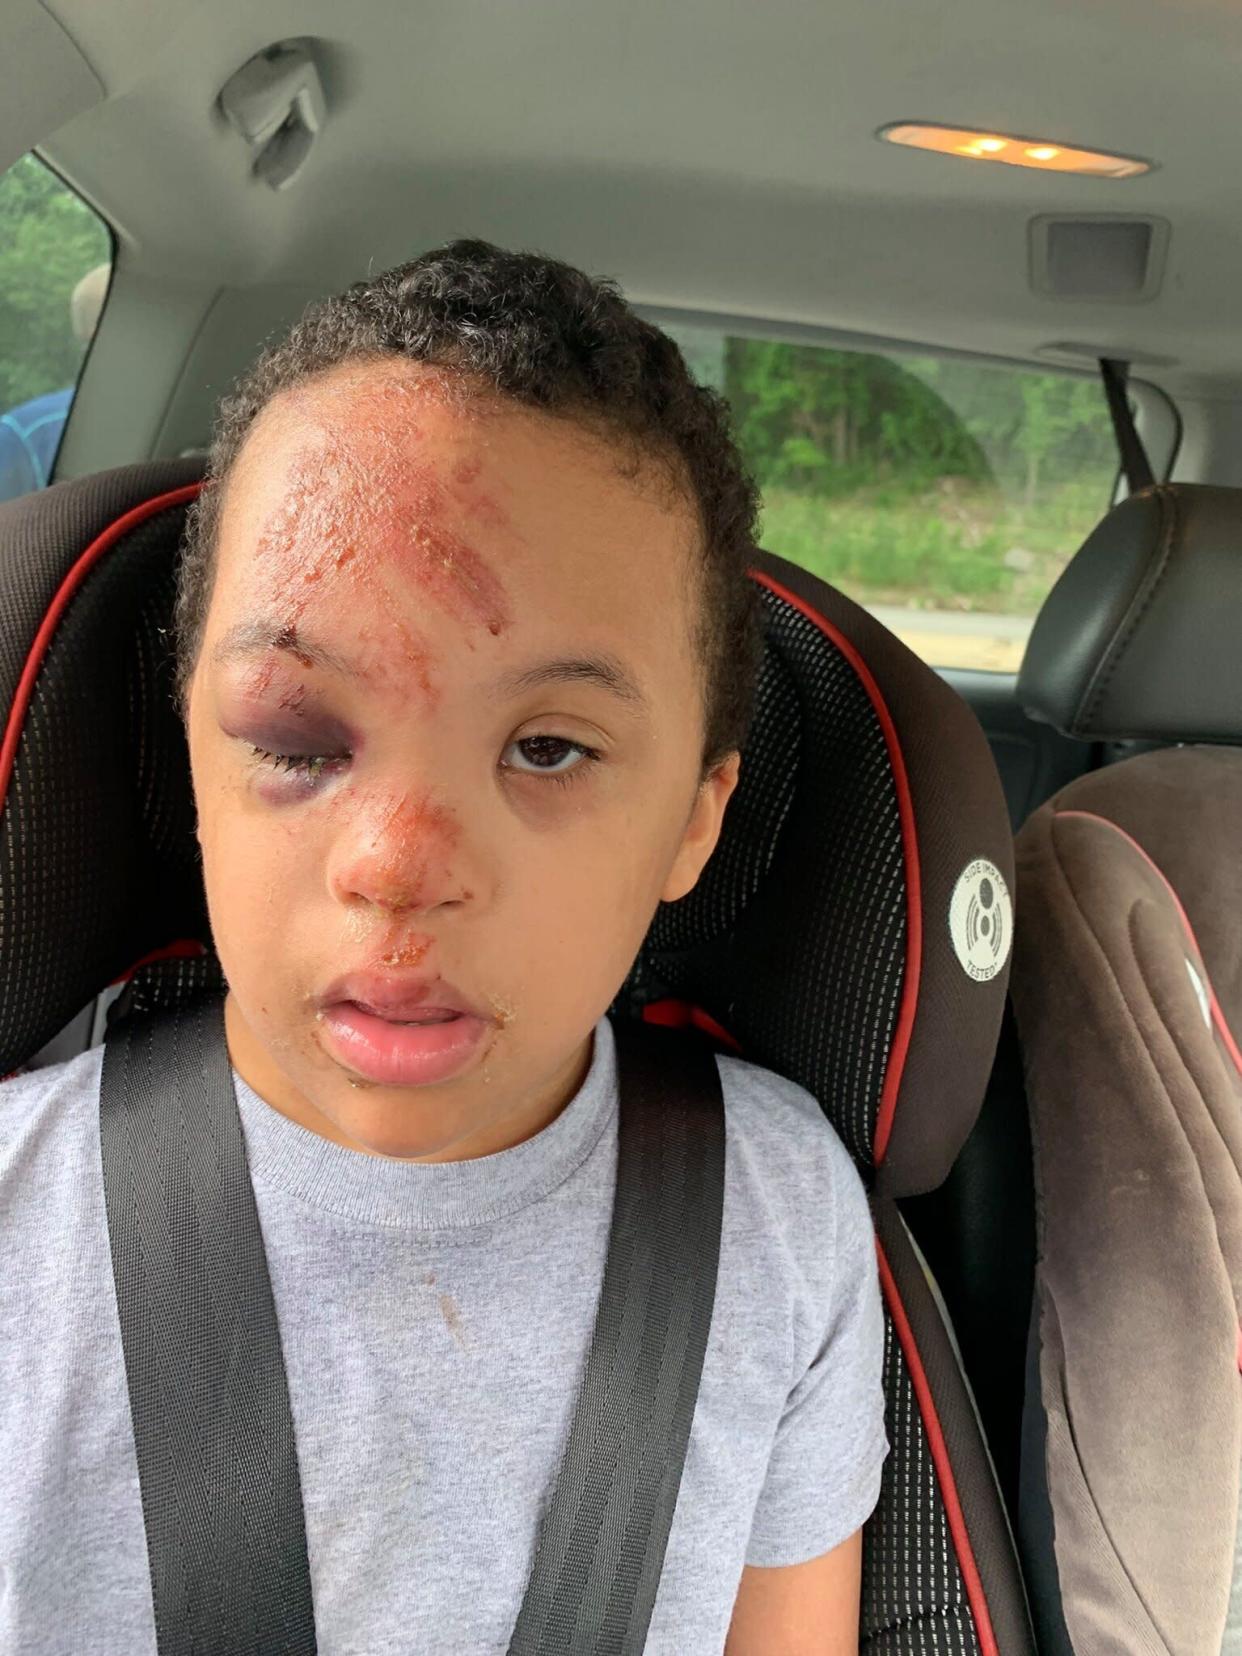 Young boy with Down Syndrome was injured on a school bus, and the school refused to provide video footage from the bus to the boy's family. (Credit: Angel Rivera/Facebook)